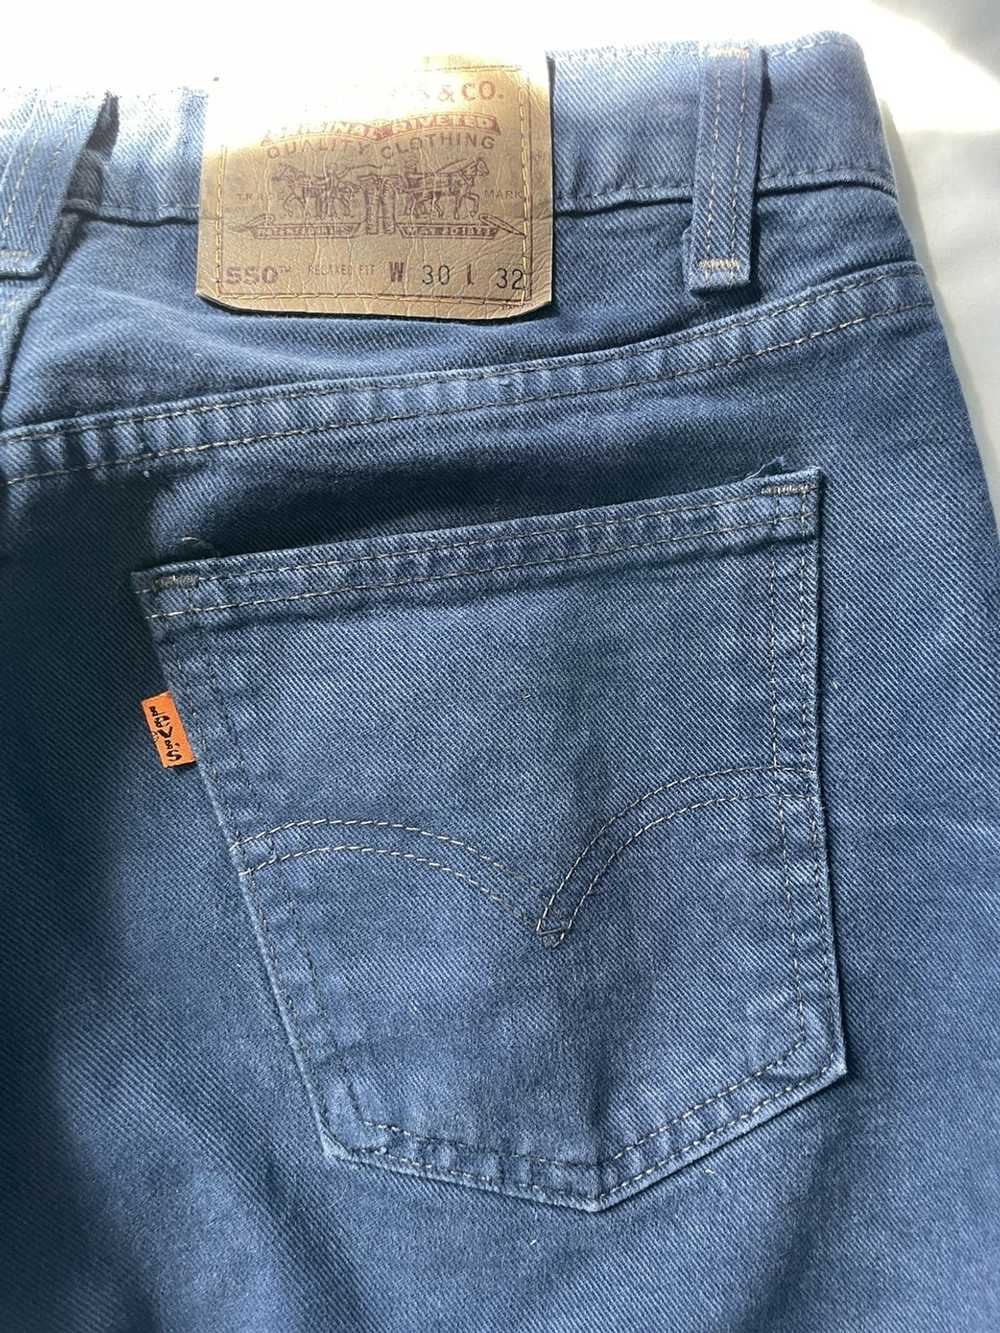 Levi's Vintage 550 relaxed fit jean - image 5